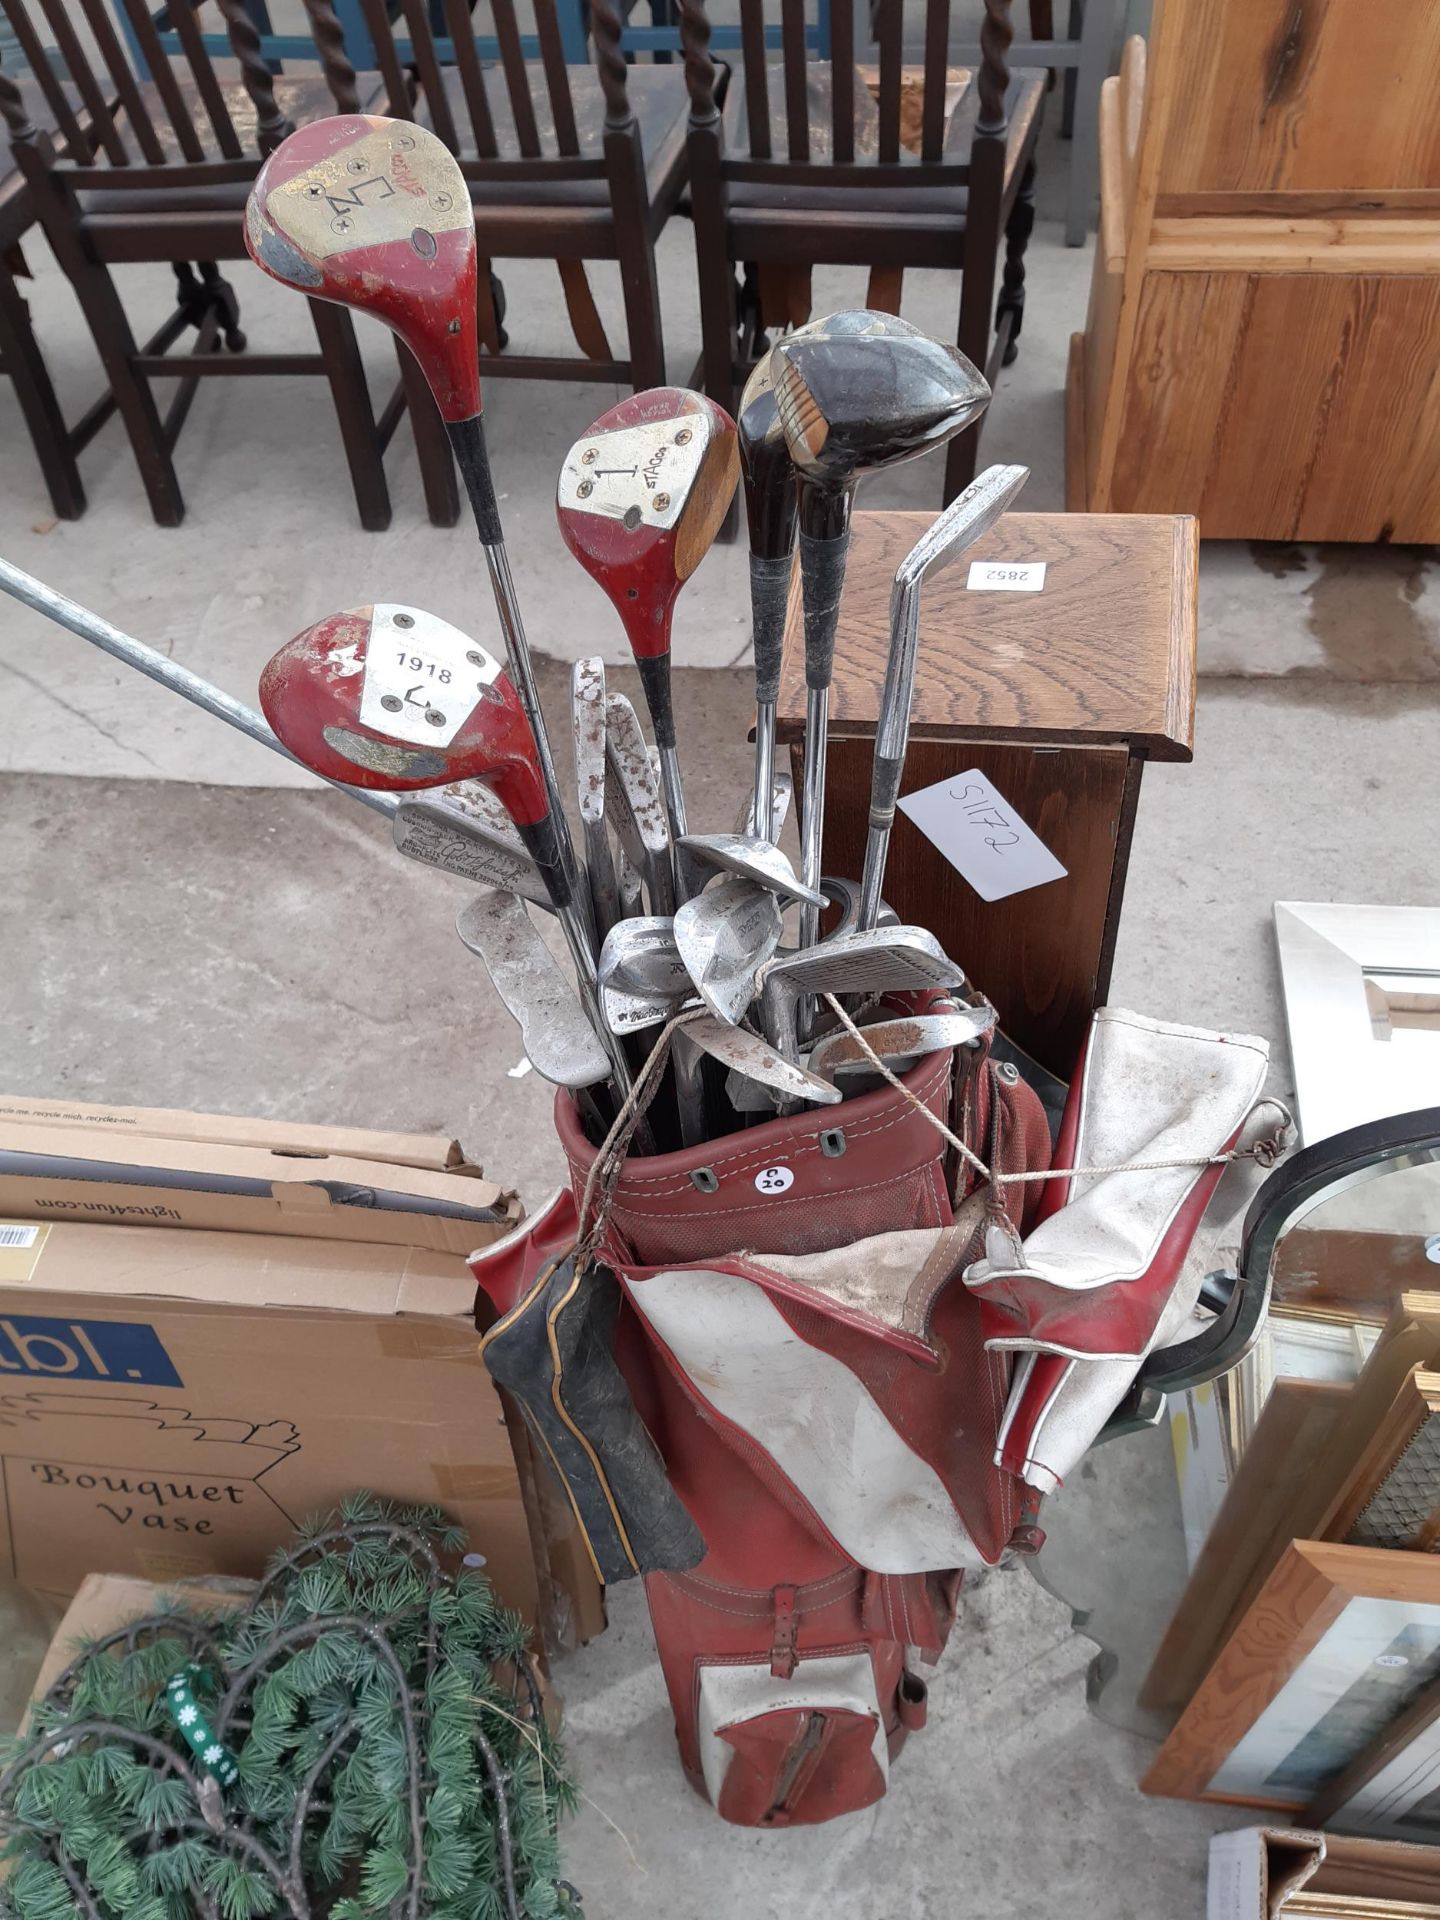 A VINTAGE GOLF BAG AND AN ASSORTMENT OF VINTAGE GOLF CLUBS ETC